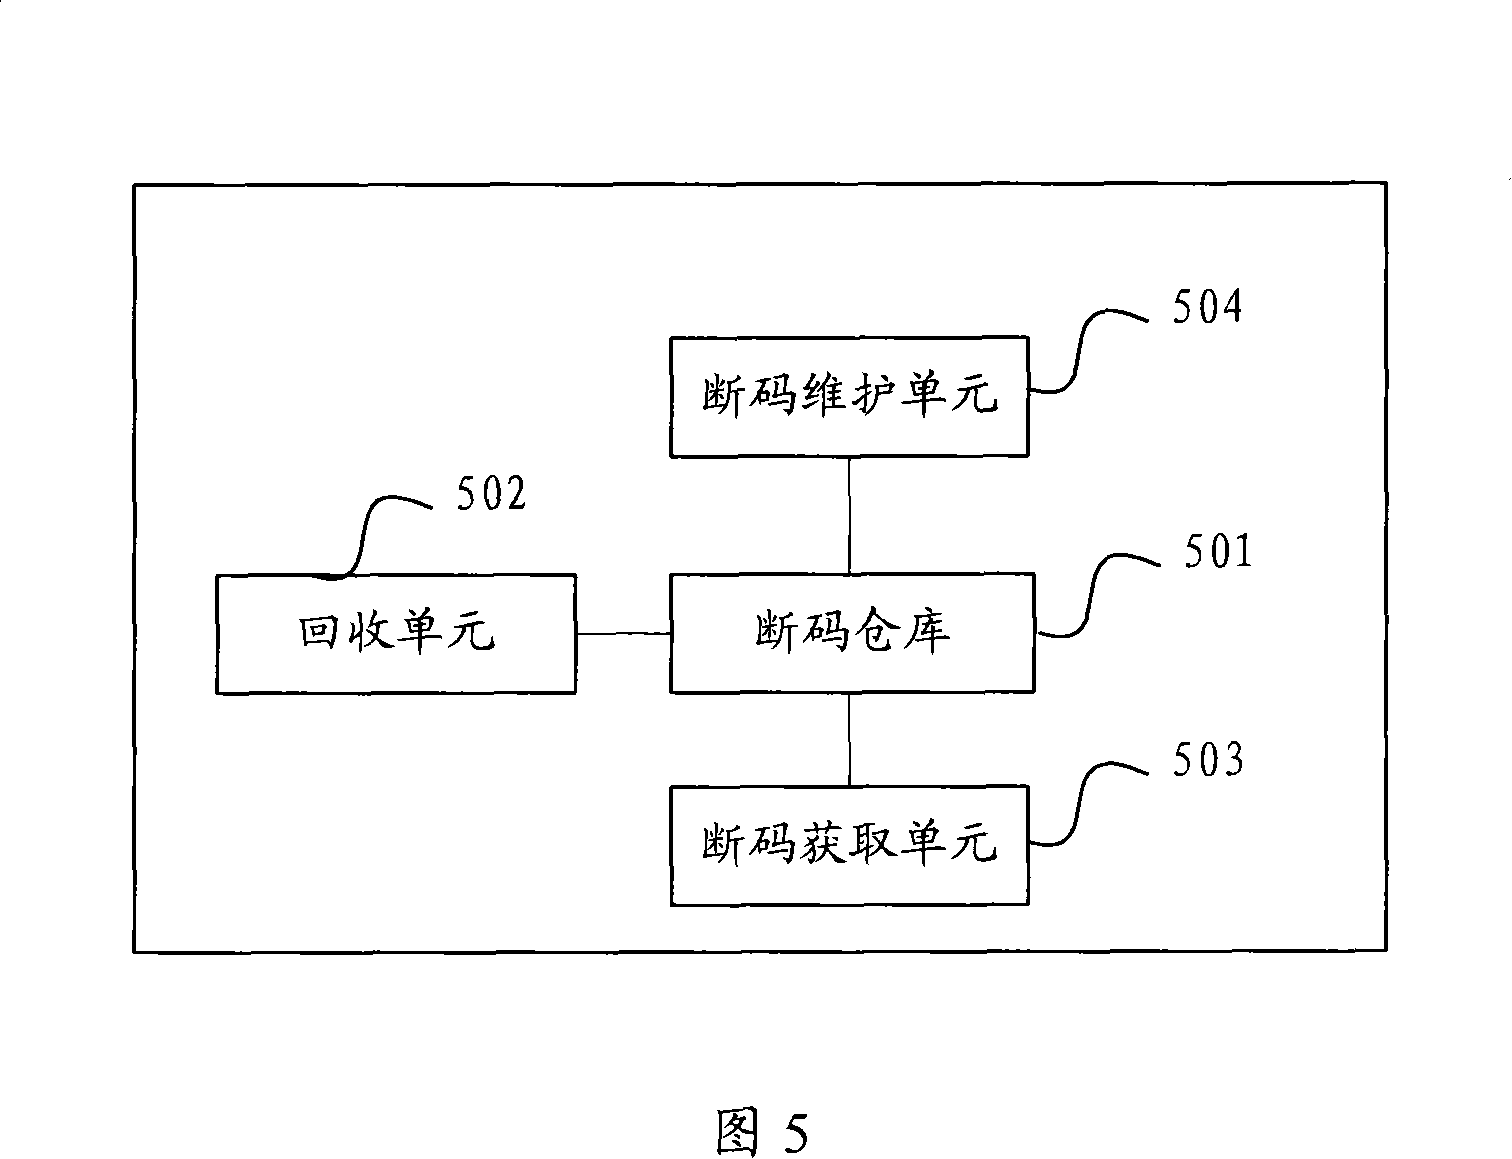 Method and system for treating intermittent code